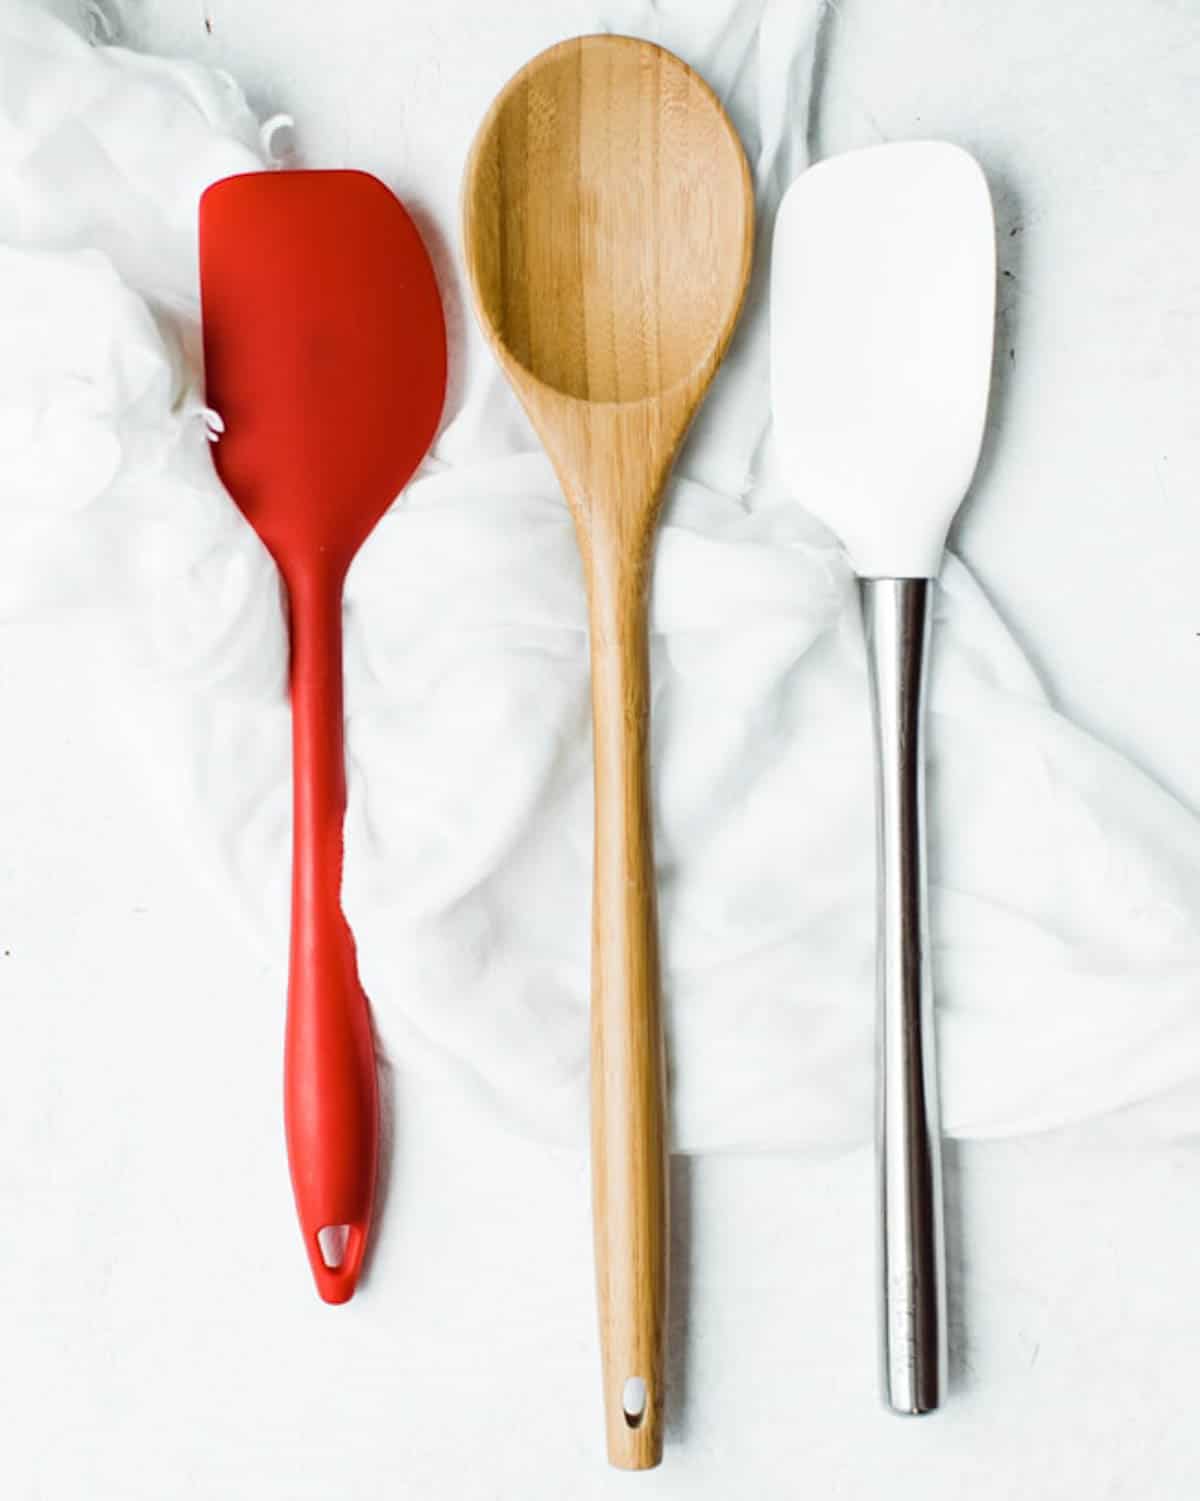 Silicone and wood spatulas shown on a napkin.